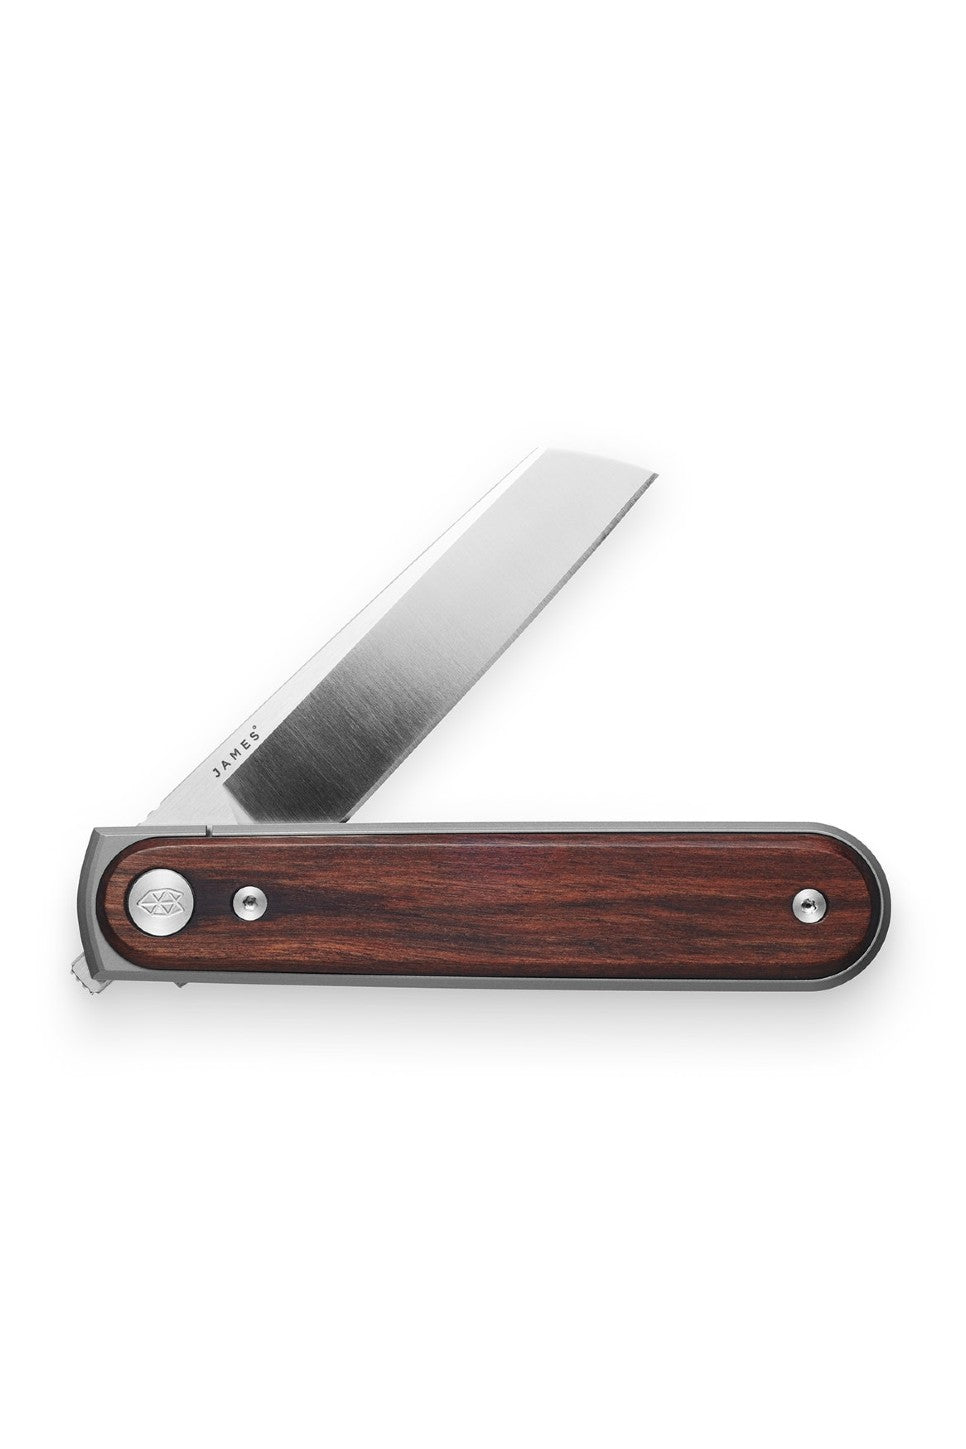 The James Brand - The Duval Knife - Rosewood/Stainless/Straight